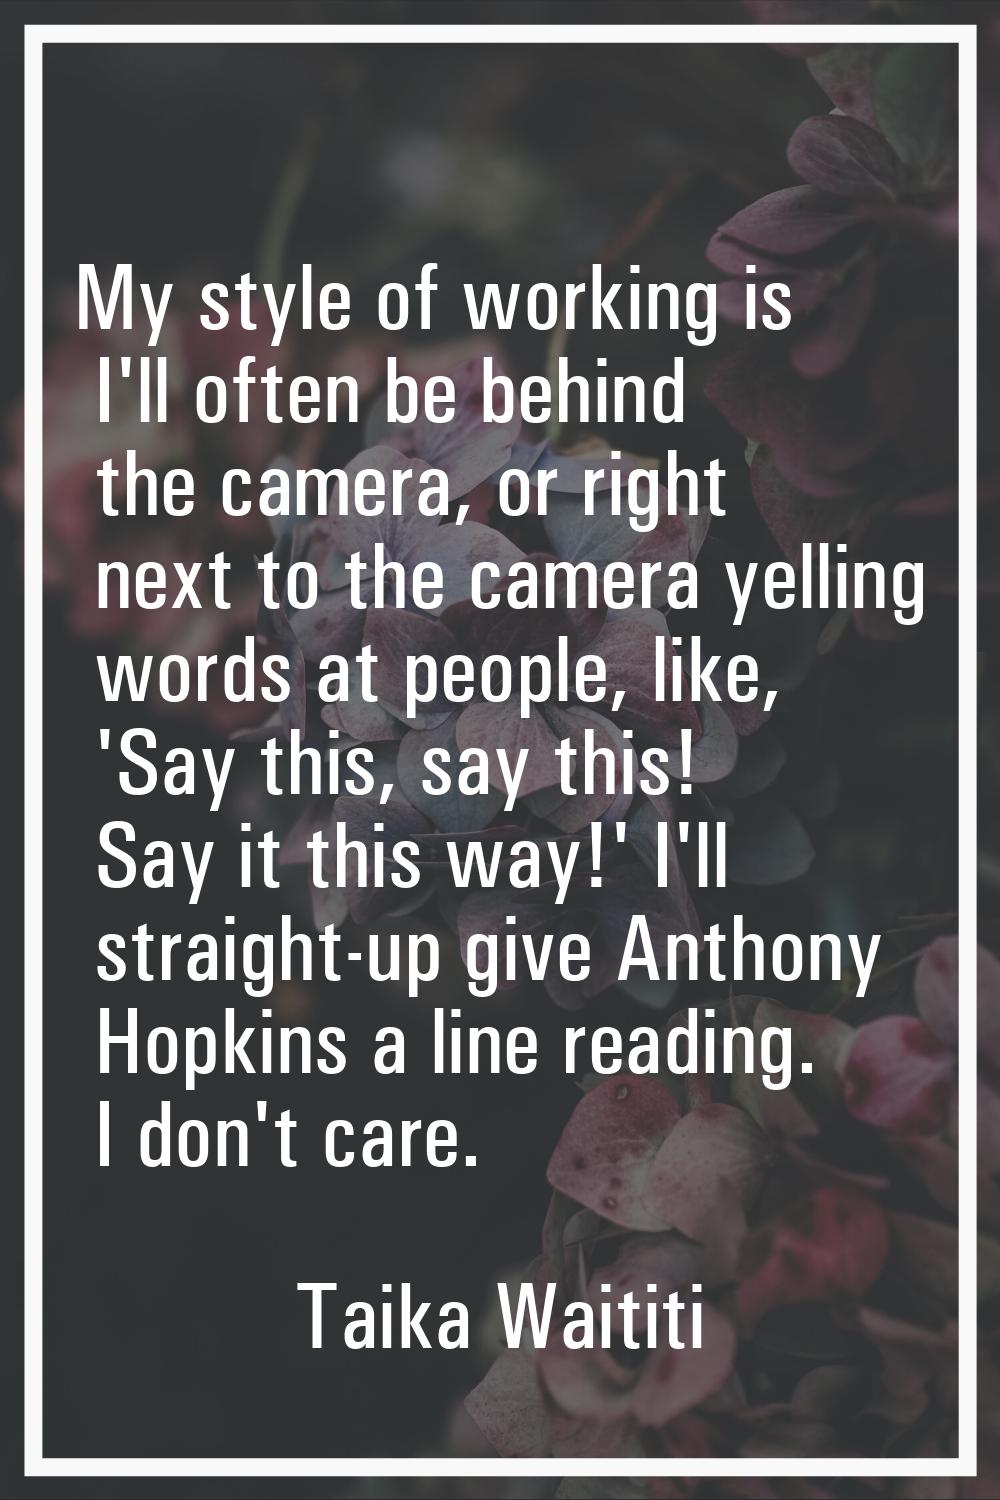 My style of working is I'll often be behind the camera, or right next to the camera yelling words a